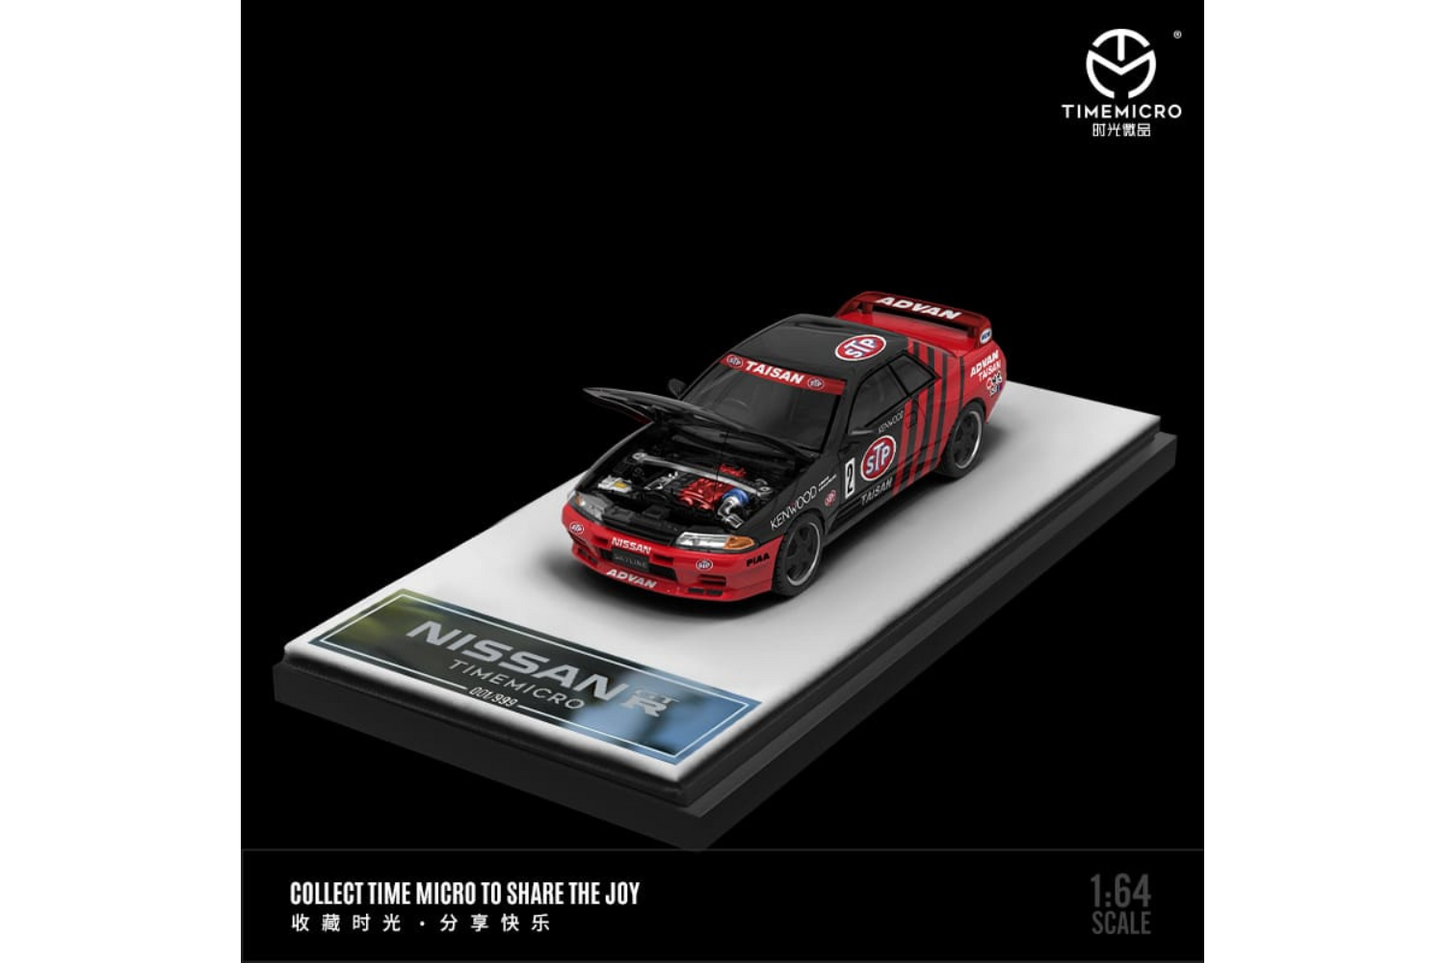 Time Micro 1/64 Nissan Skyline GT-R (R32) In #2 Advan Livery